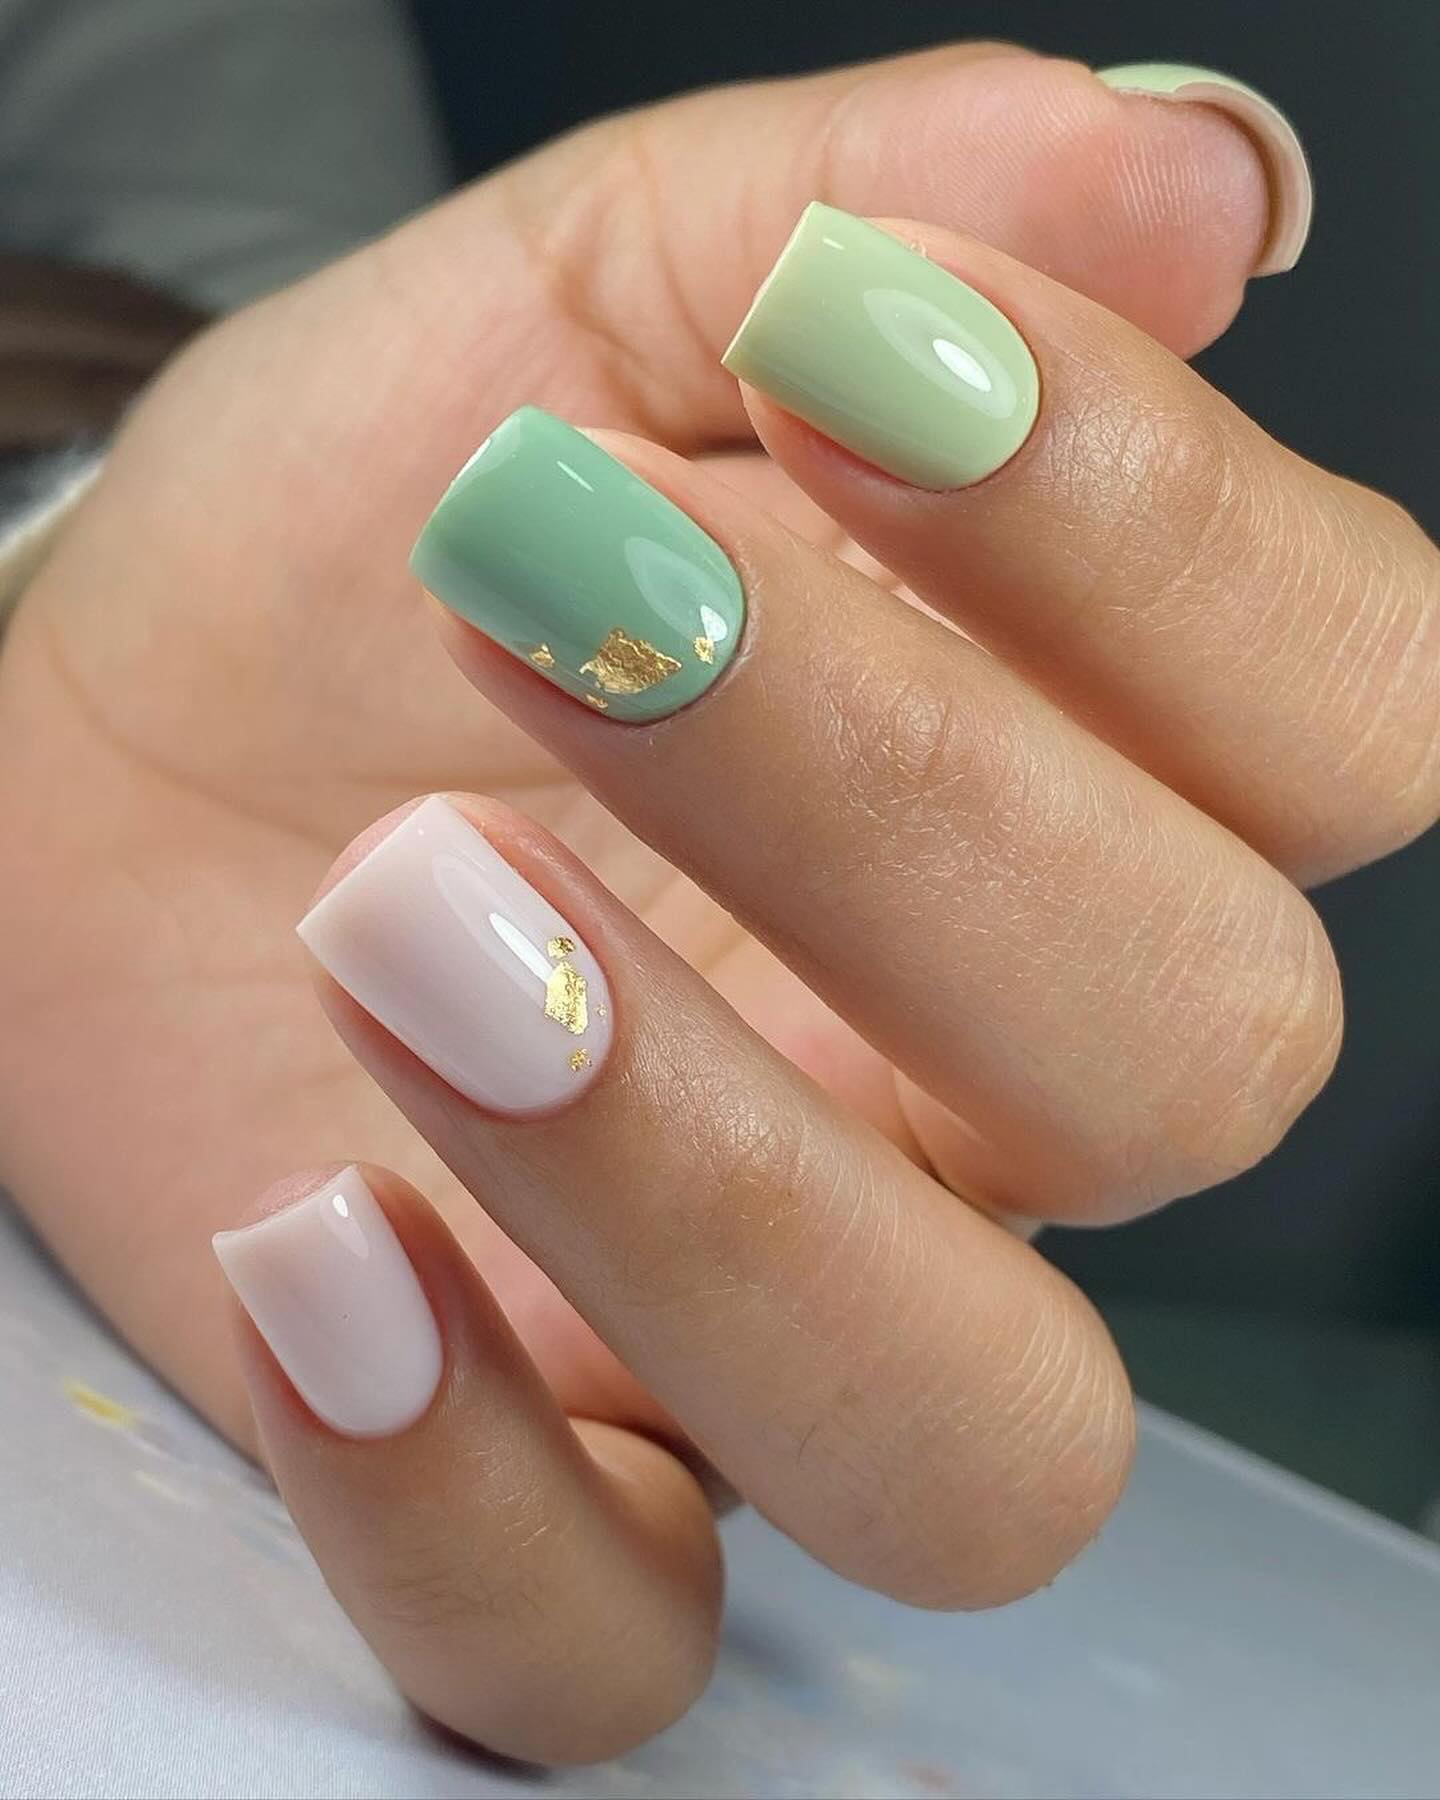 100 Pretty Spring Nail Designs To Try This Year images 46